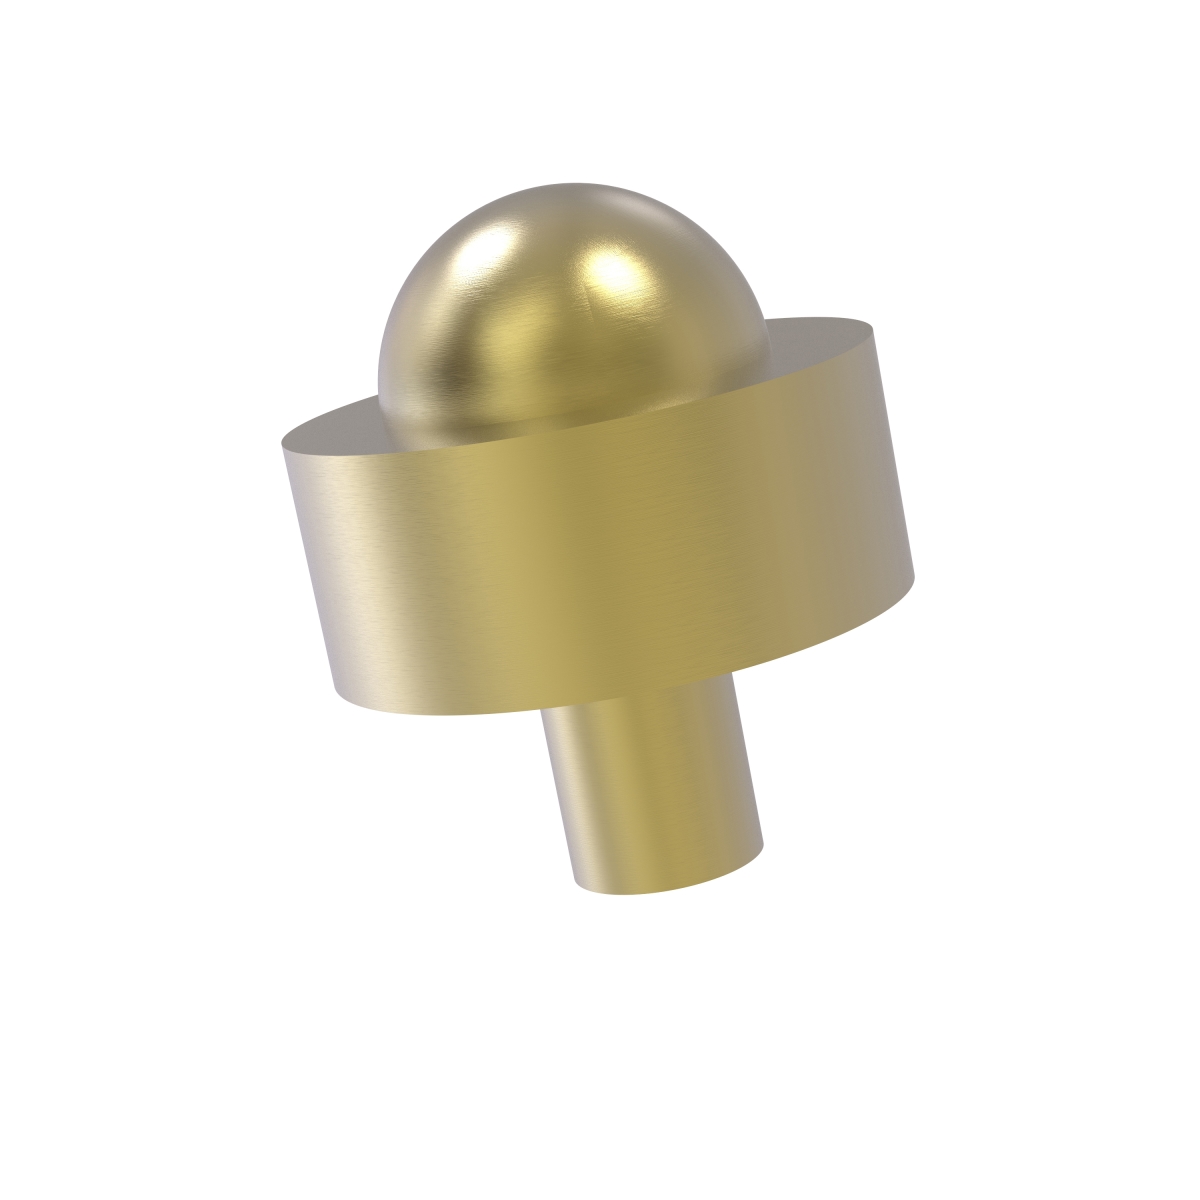 101a-sbr 1.5 X 1.5 In. Cabinet Knob With Smooth Ring Style, Satin Brass